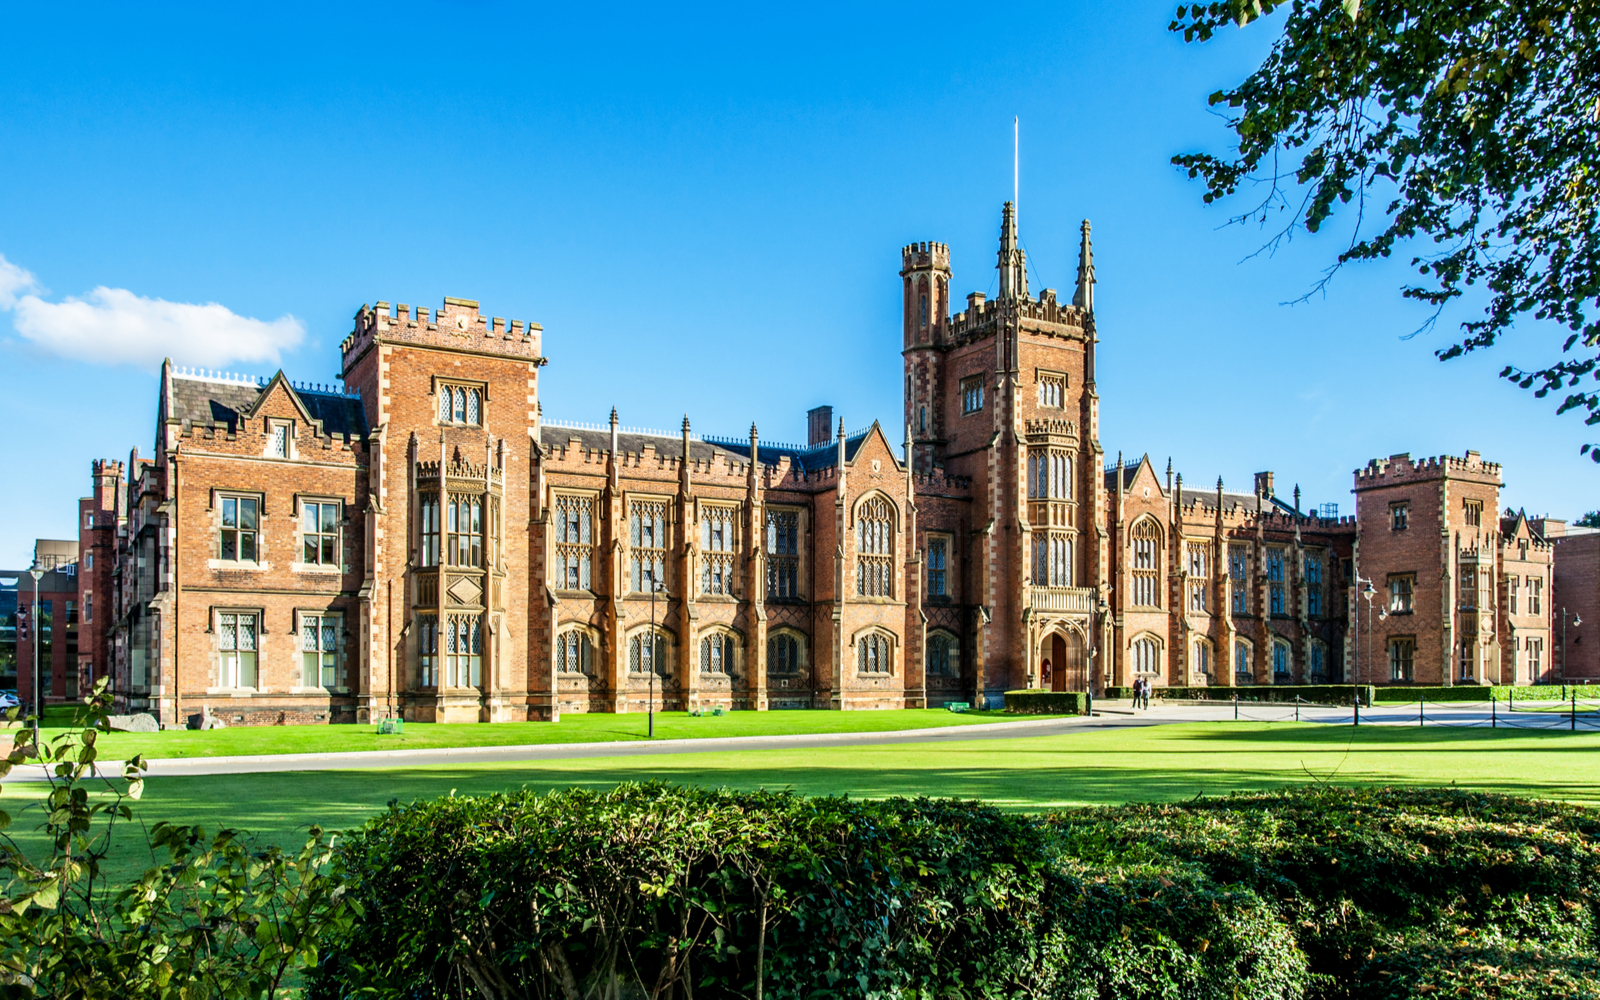 Outside of the Queen's University in Belfast, one of the best colleges in Ireland